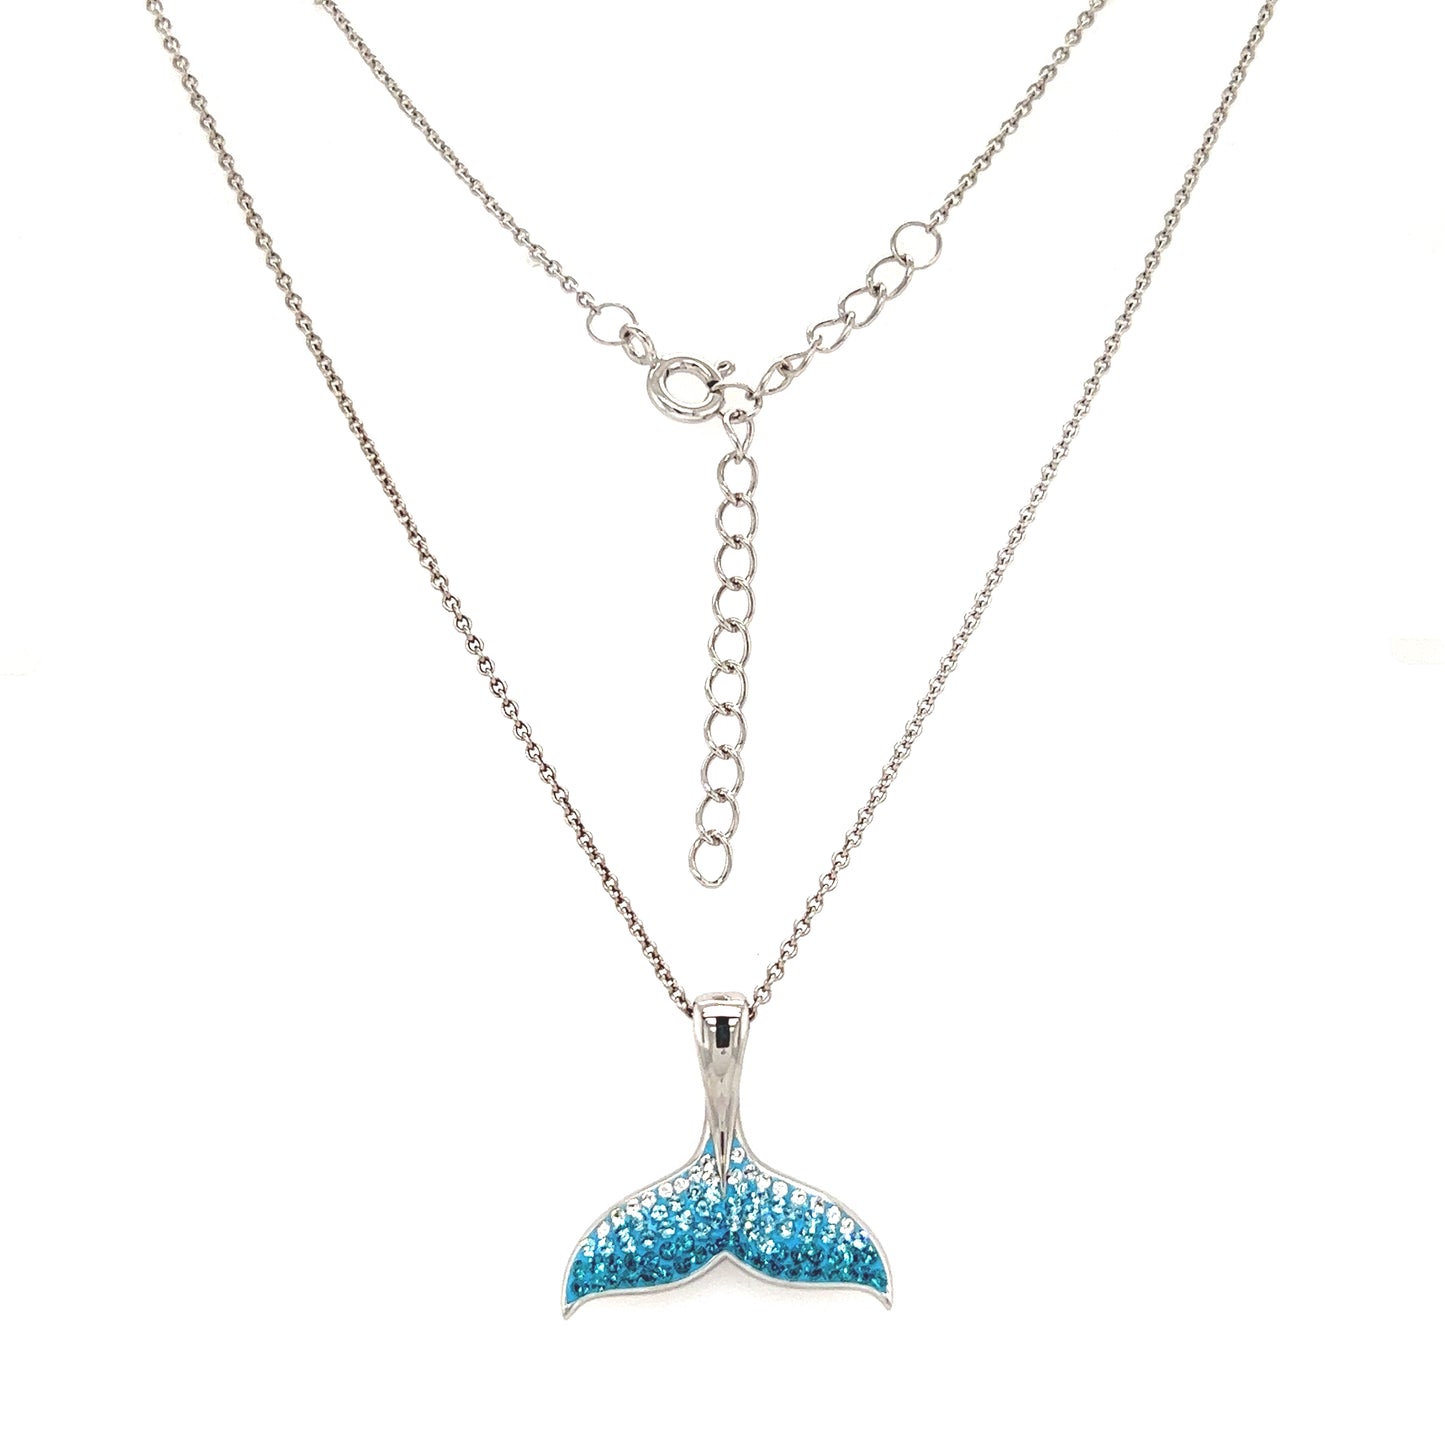 Whale Tail Necklace with Aqua Crystals in Sterling Silver Full Necklace View